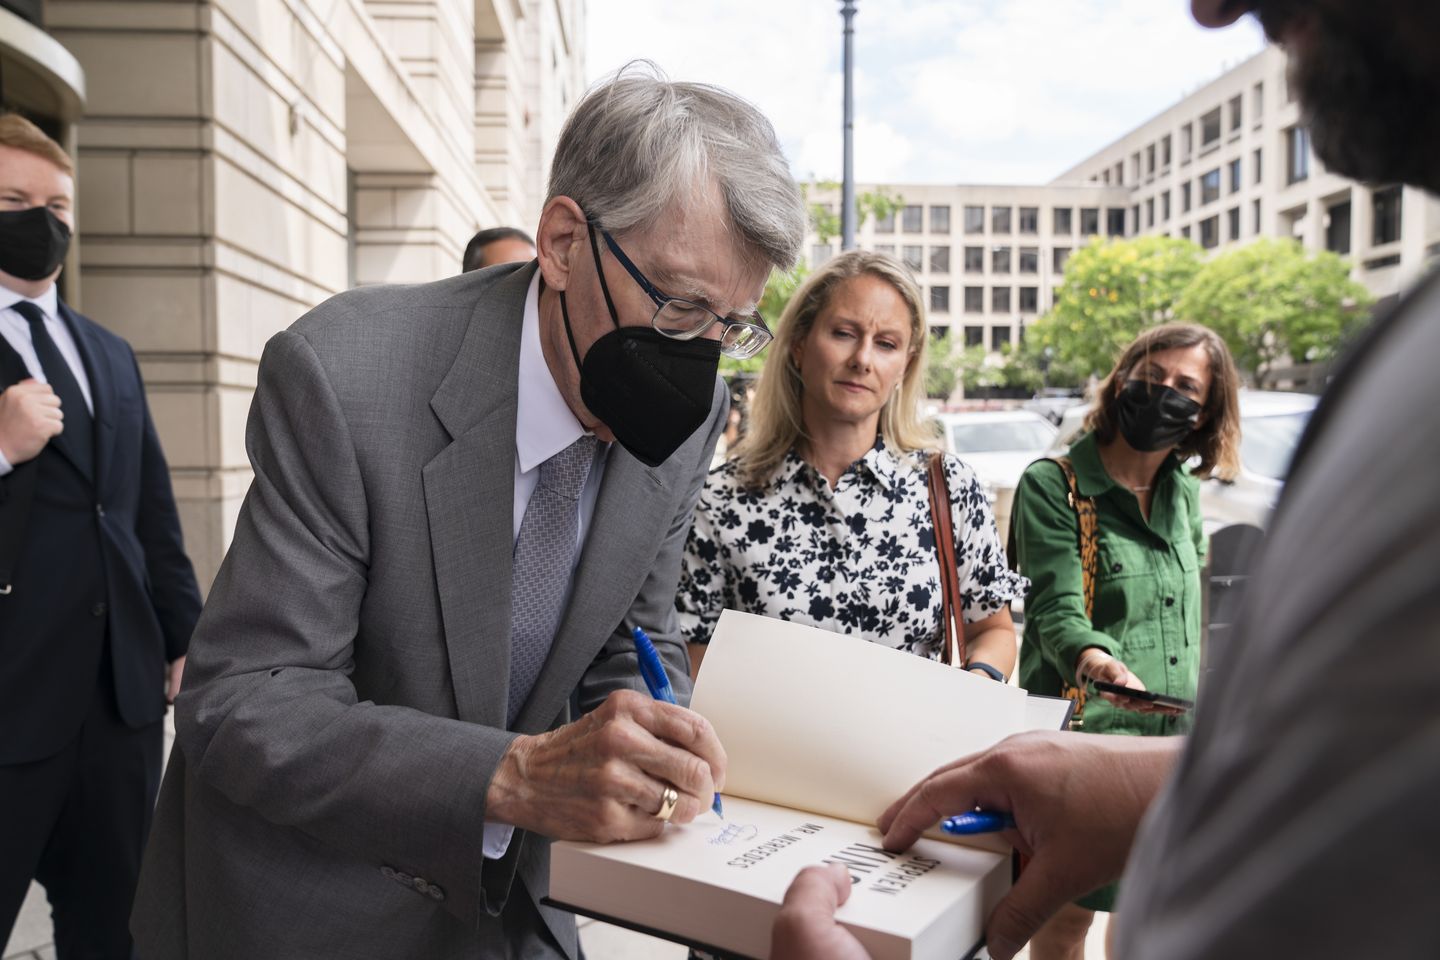 Stephen King testifies for government in books merger trial